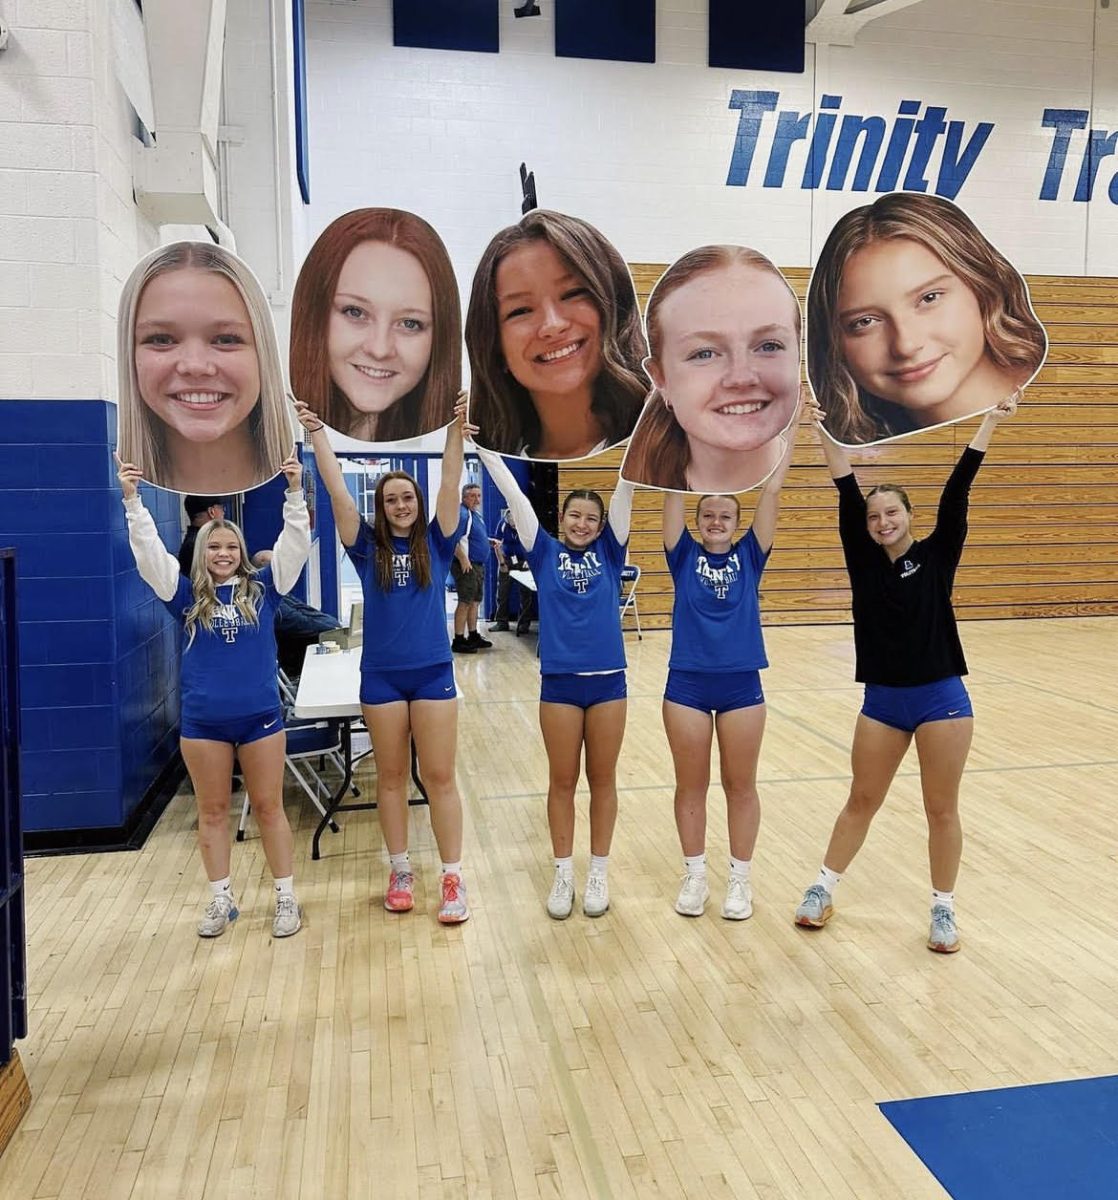 The+senior+girls+on+the+volleyball+team+hold+up+their+%E2%80%9Cfat+heads%E2%80%9D+at+their+game.+Their+senior+night+took+place+on+October+26+with+a+score+of+3-0.+